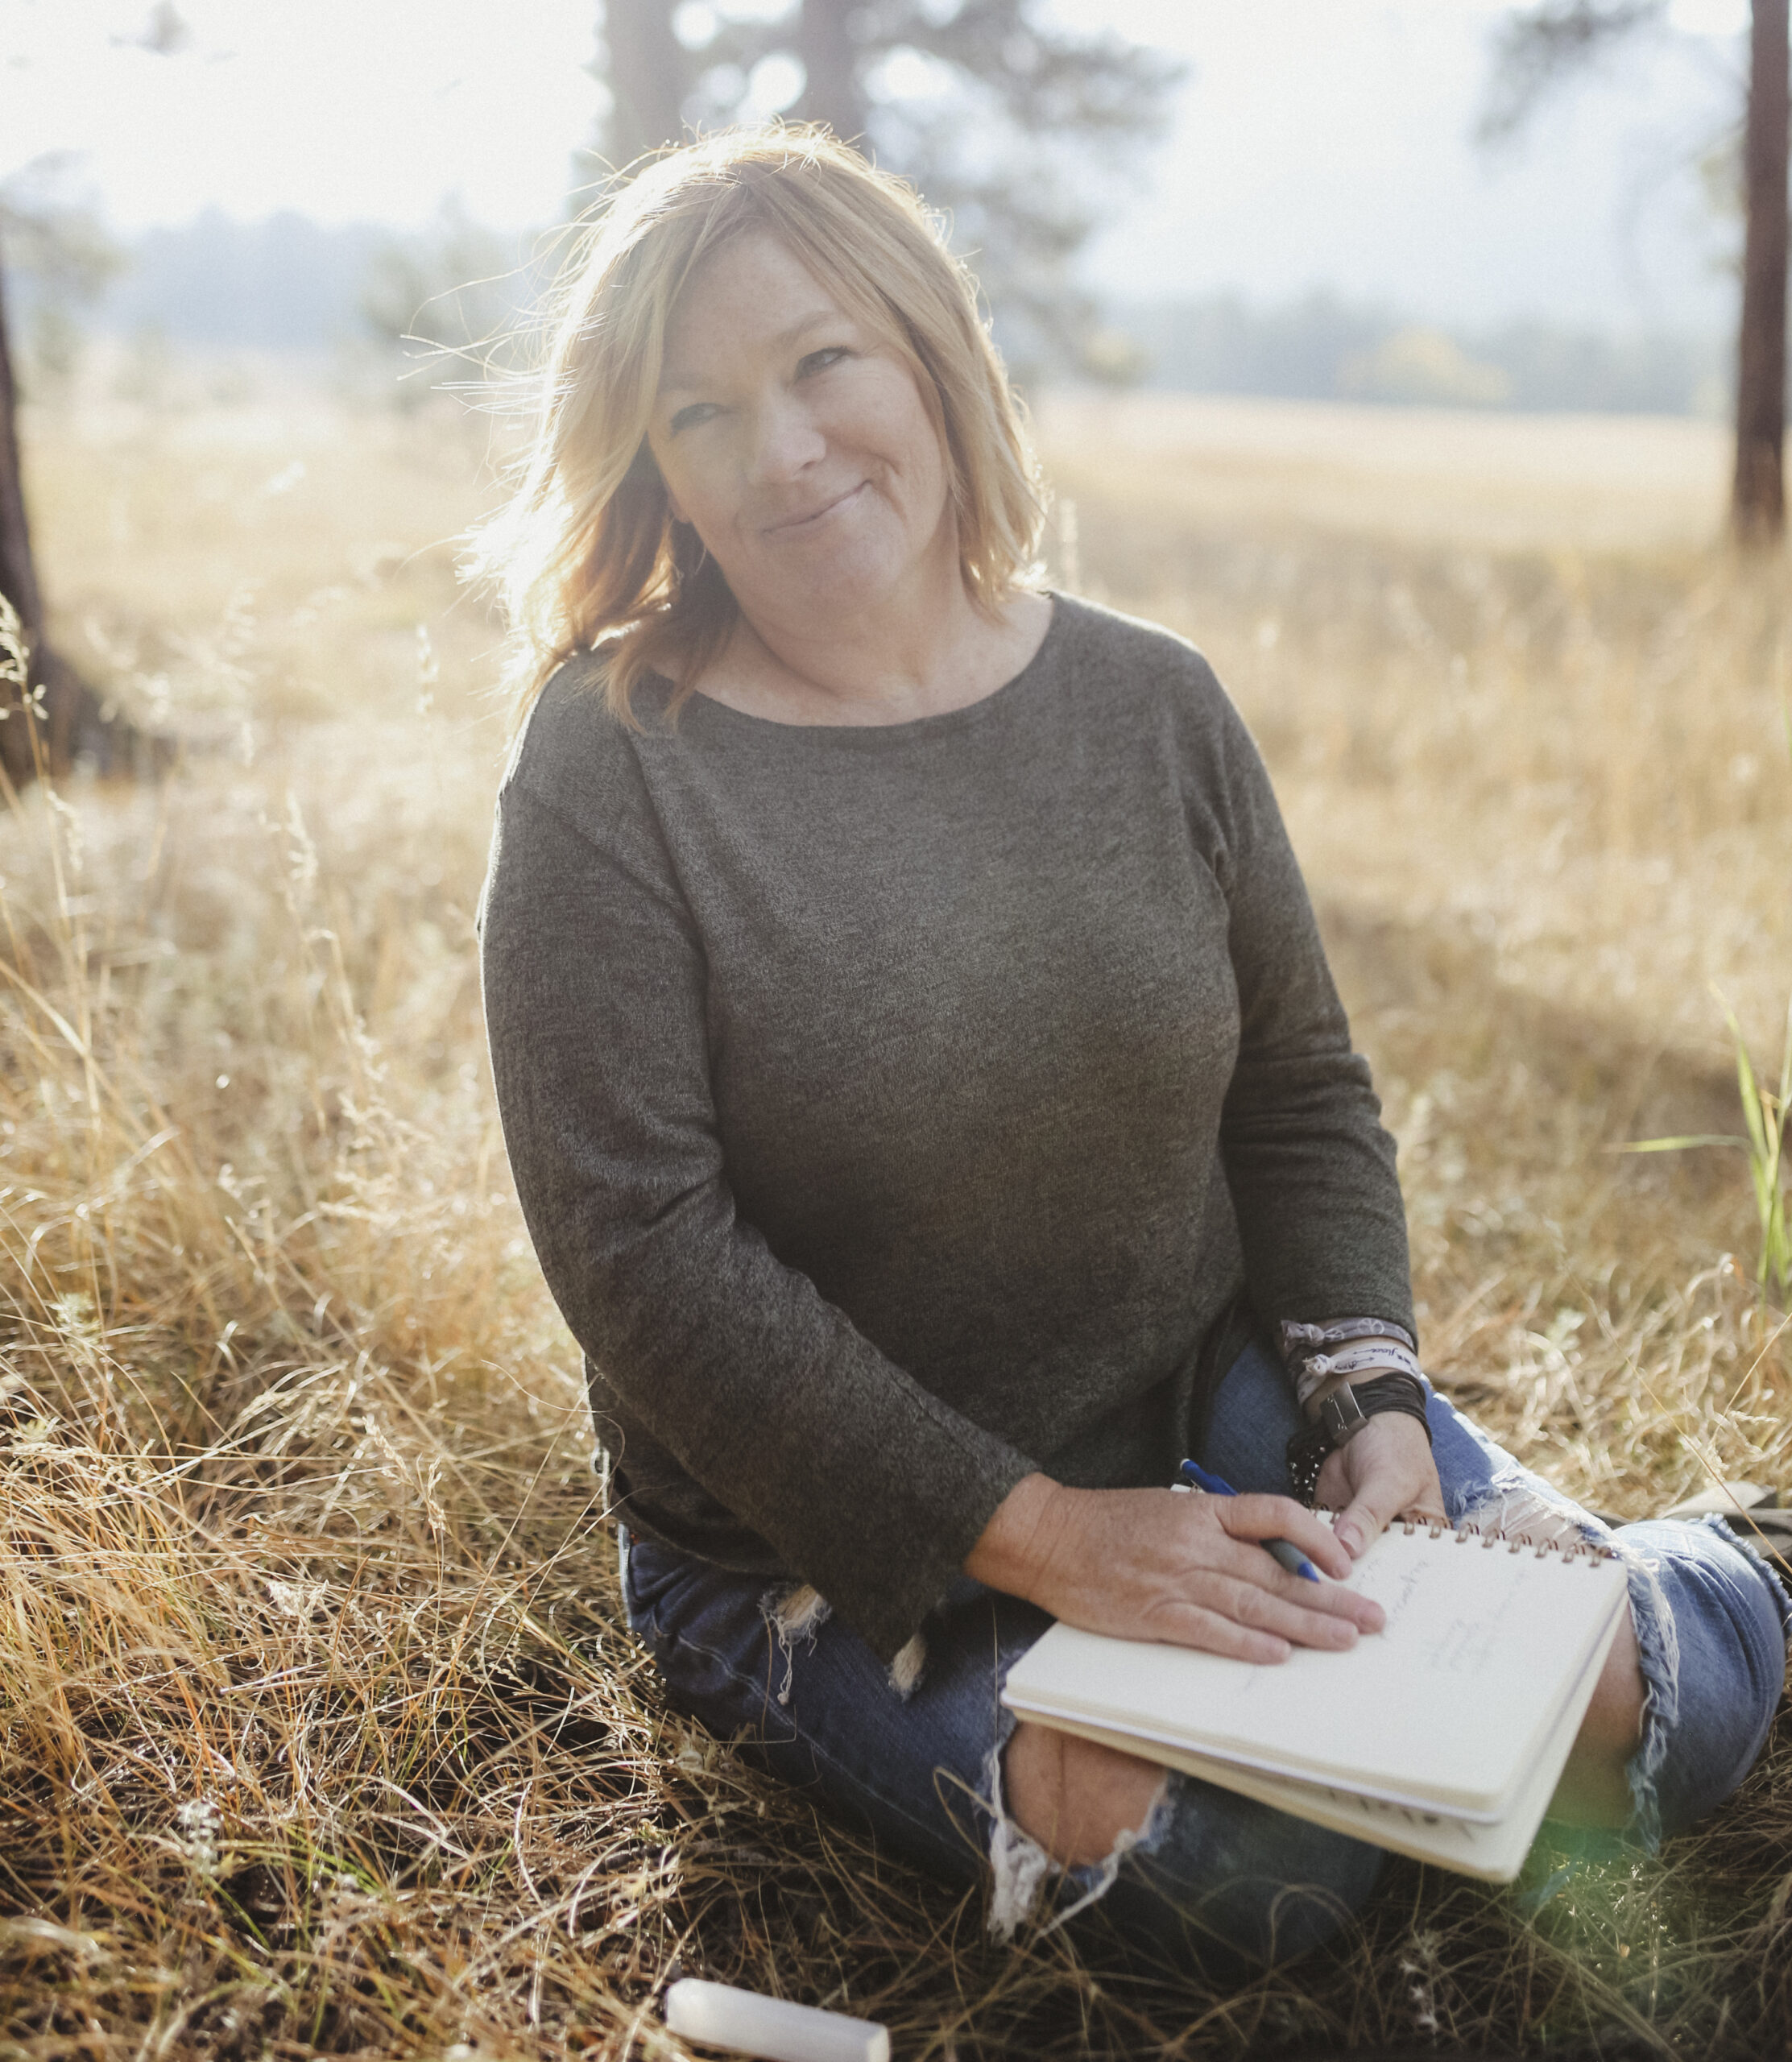 Wendy Wright sitting in a field journaling in a notebook with a happy expression, surrounded by tall grass and trees, with sunlight filtering through.